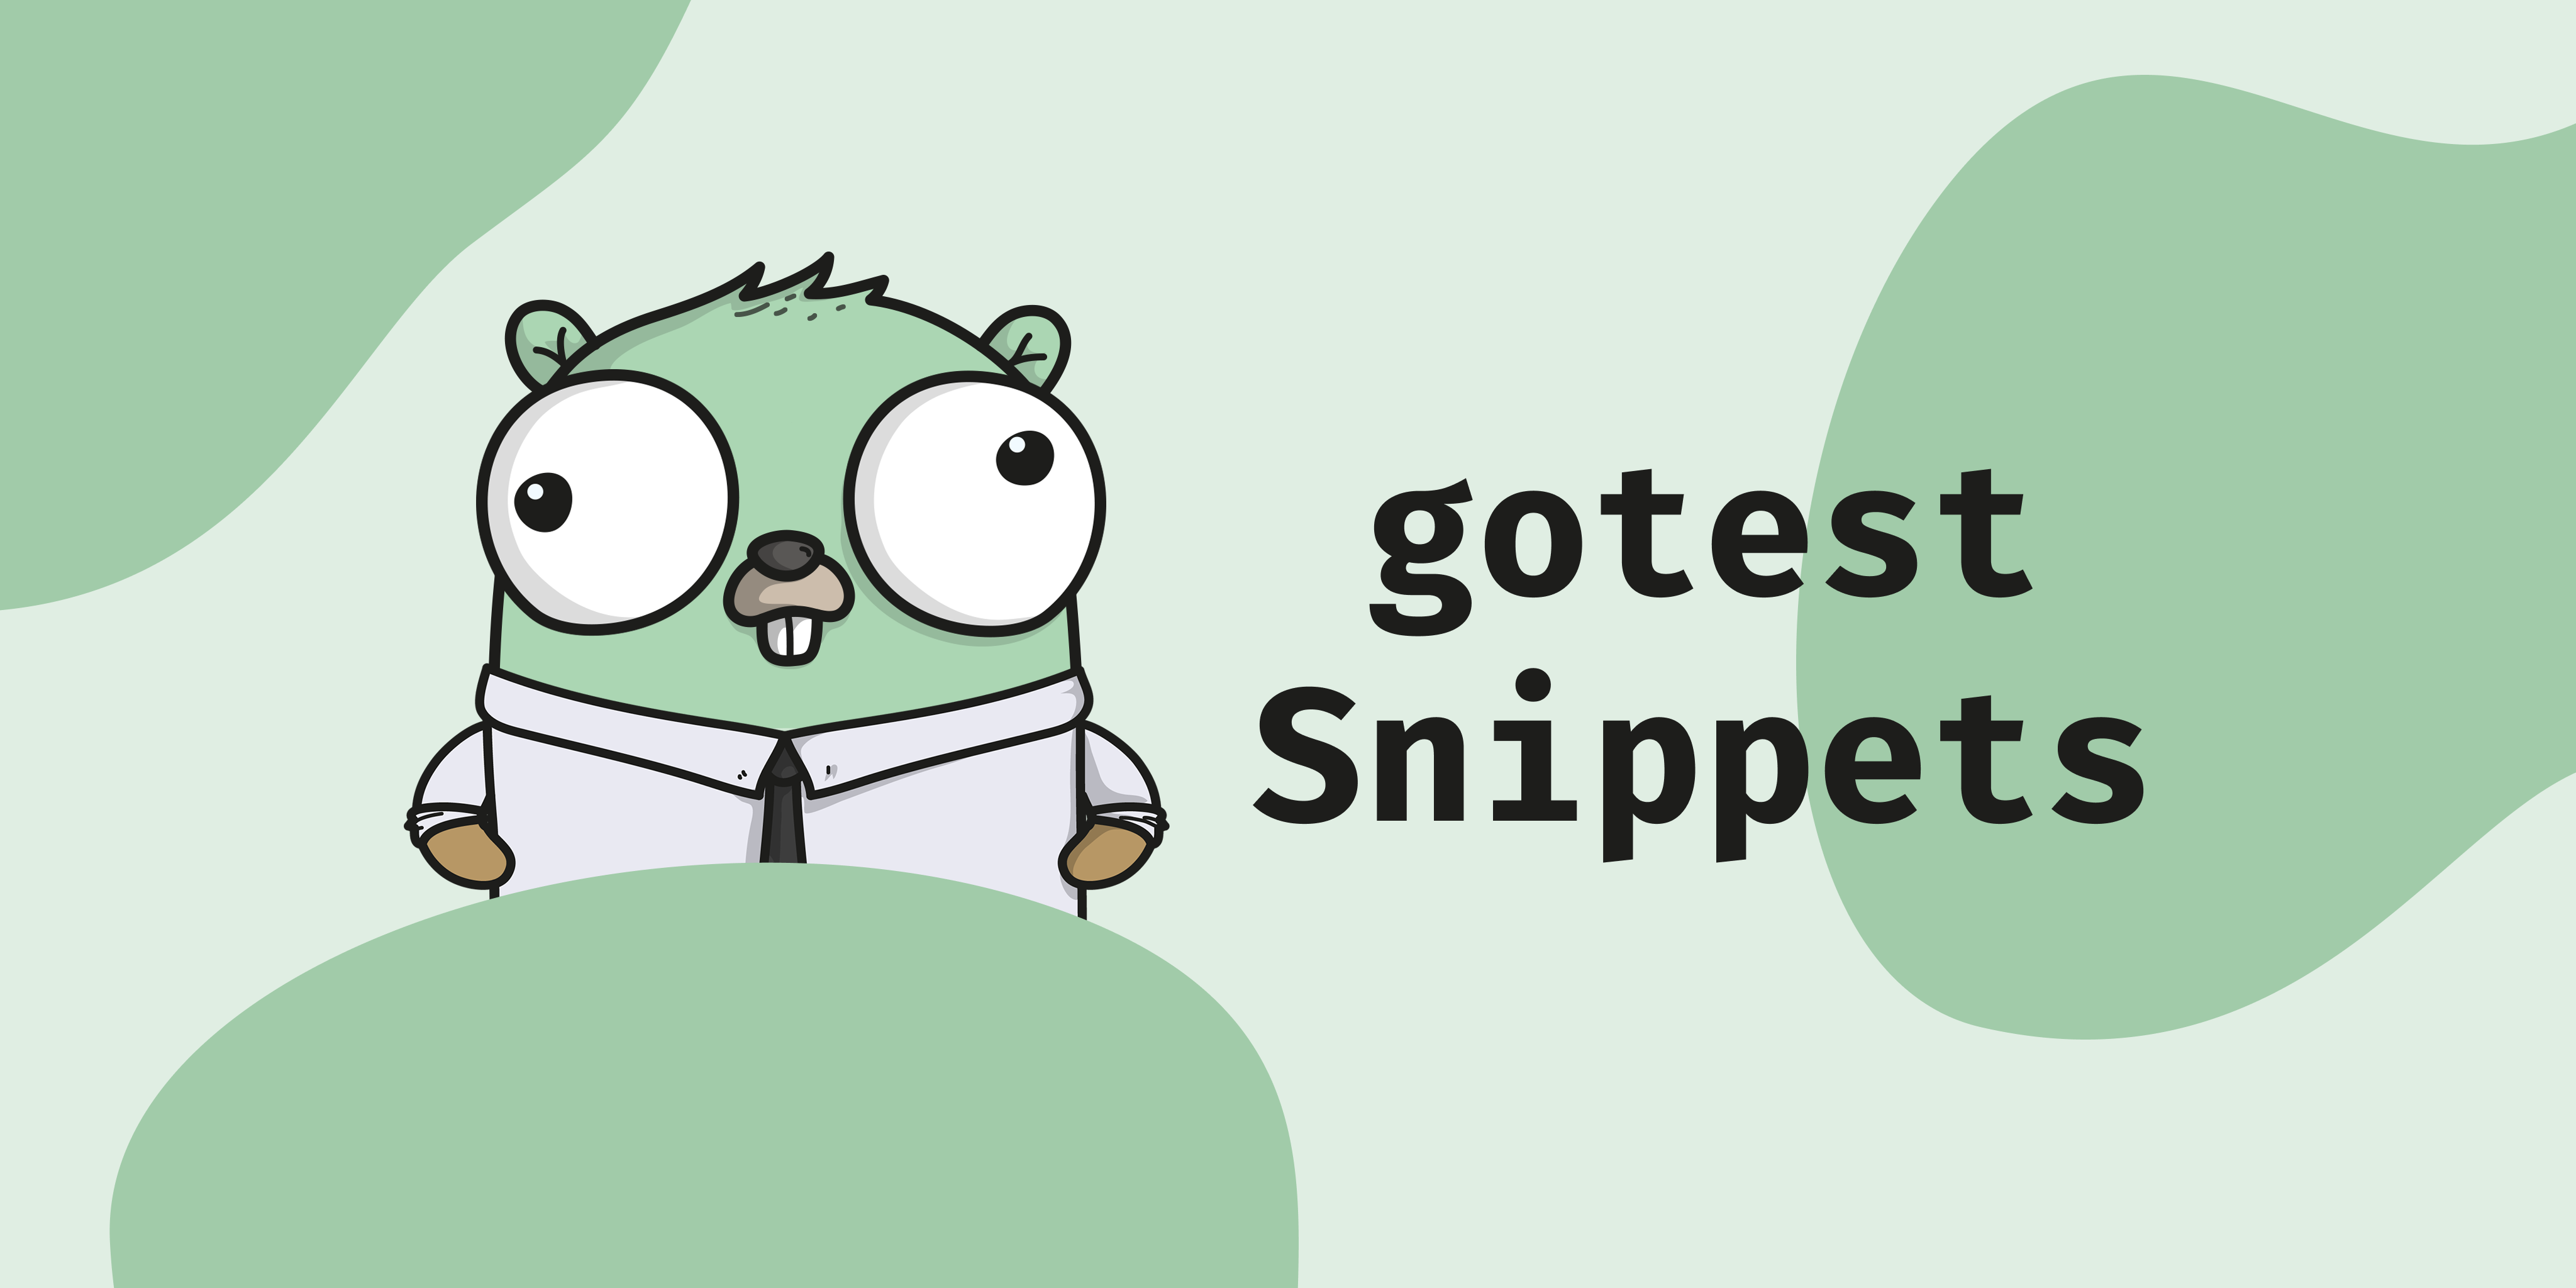 Image of the golang gopher in a shirt